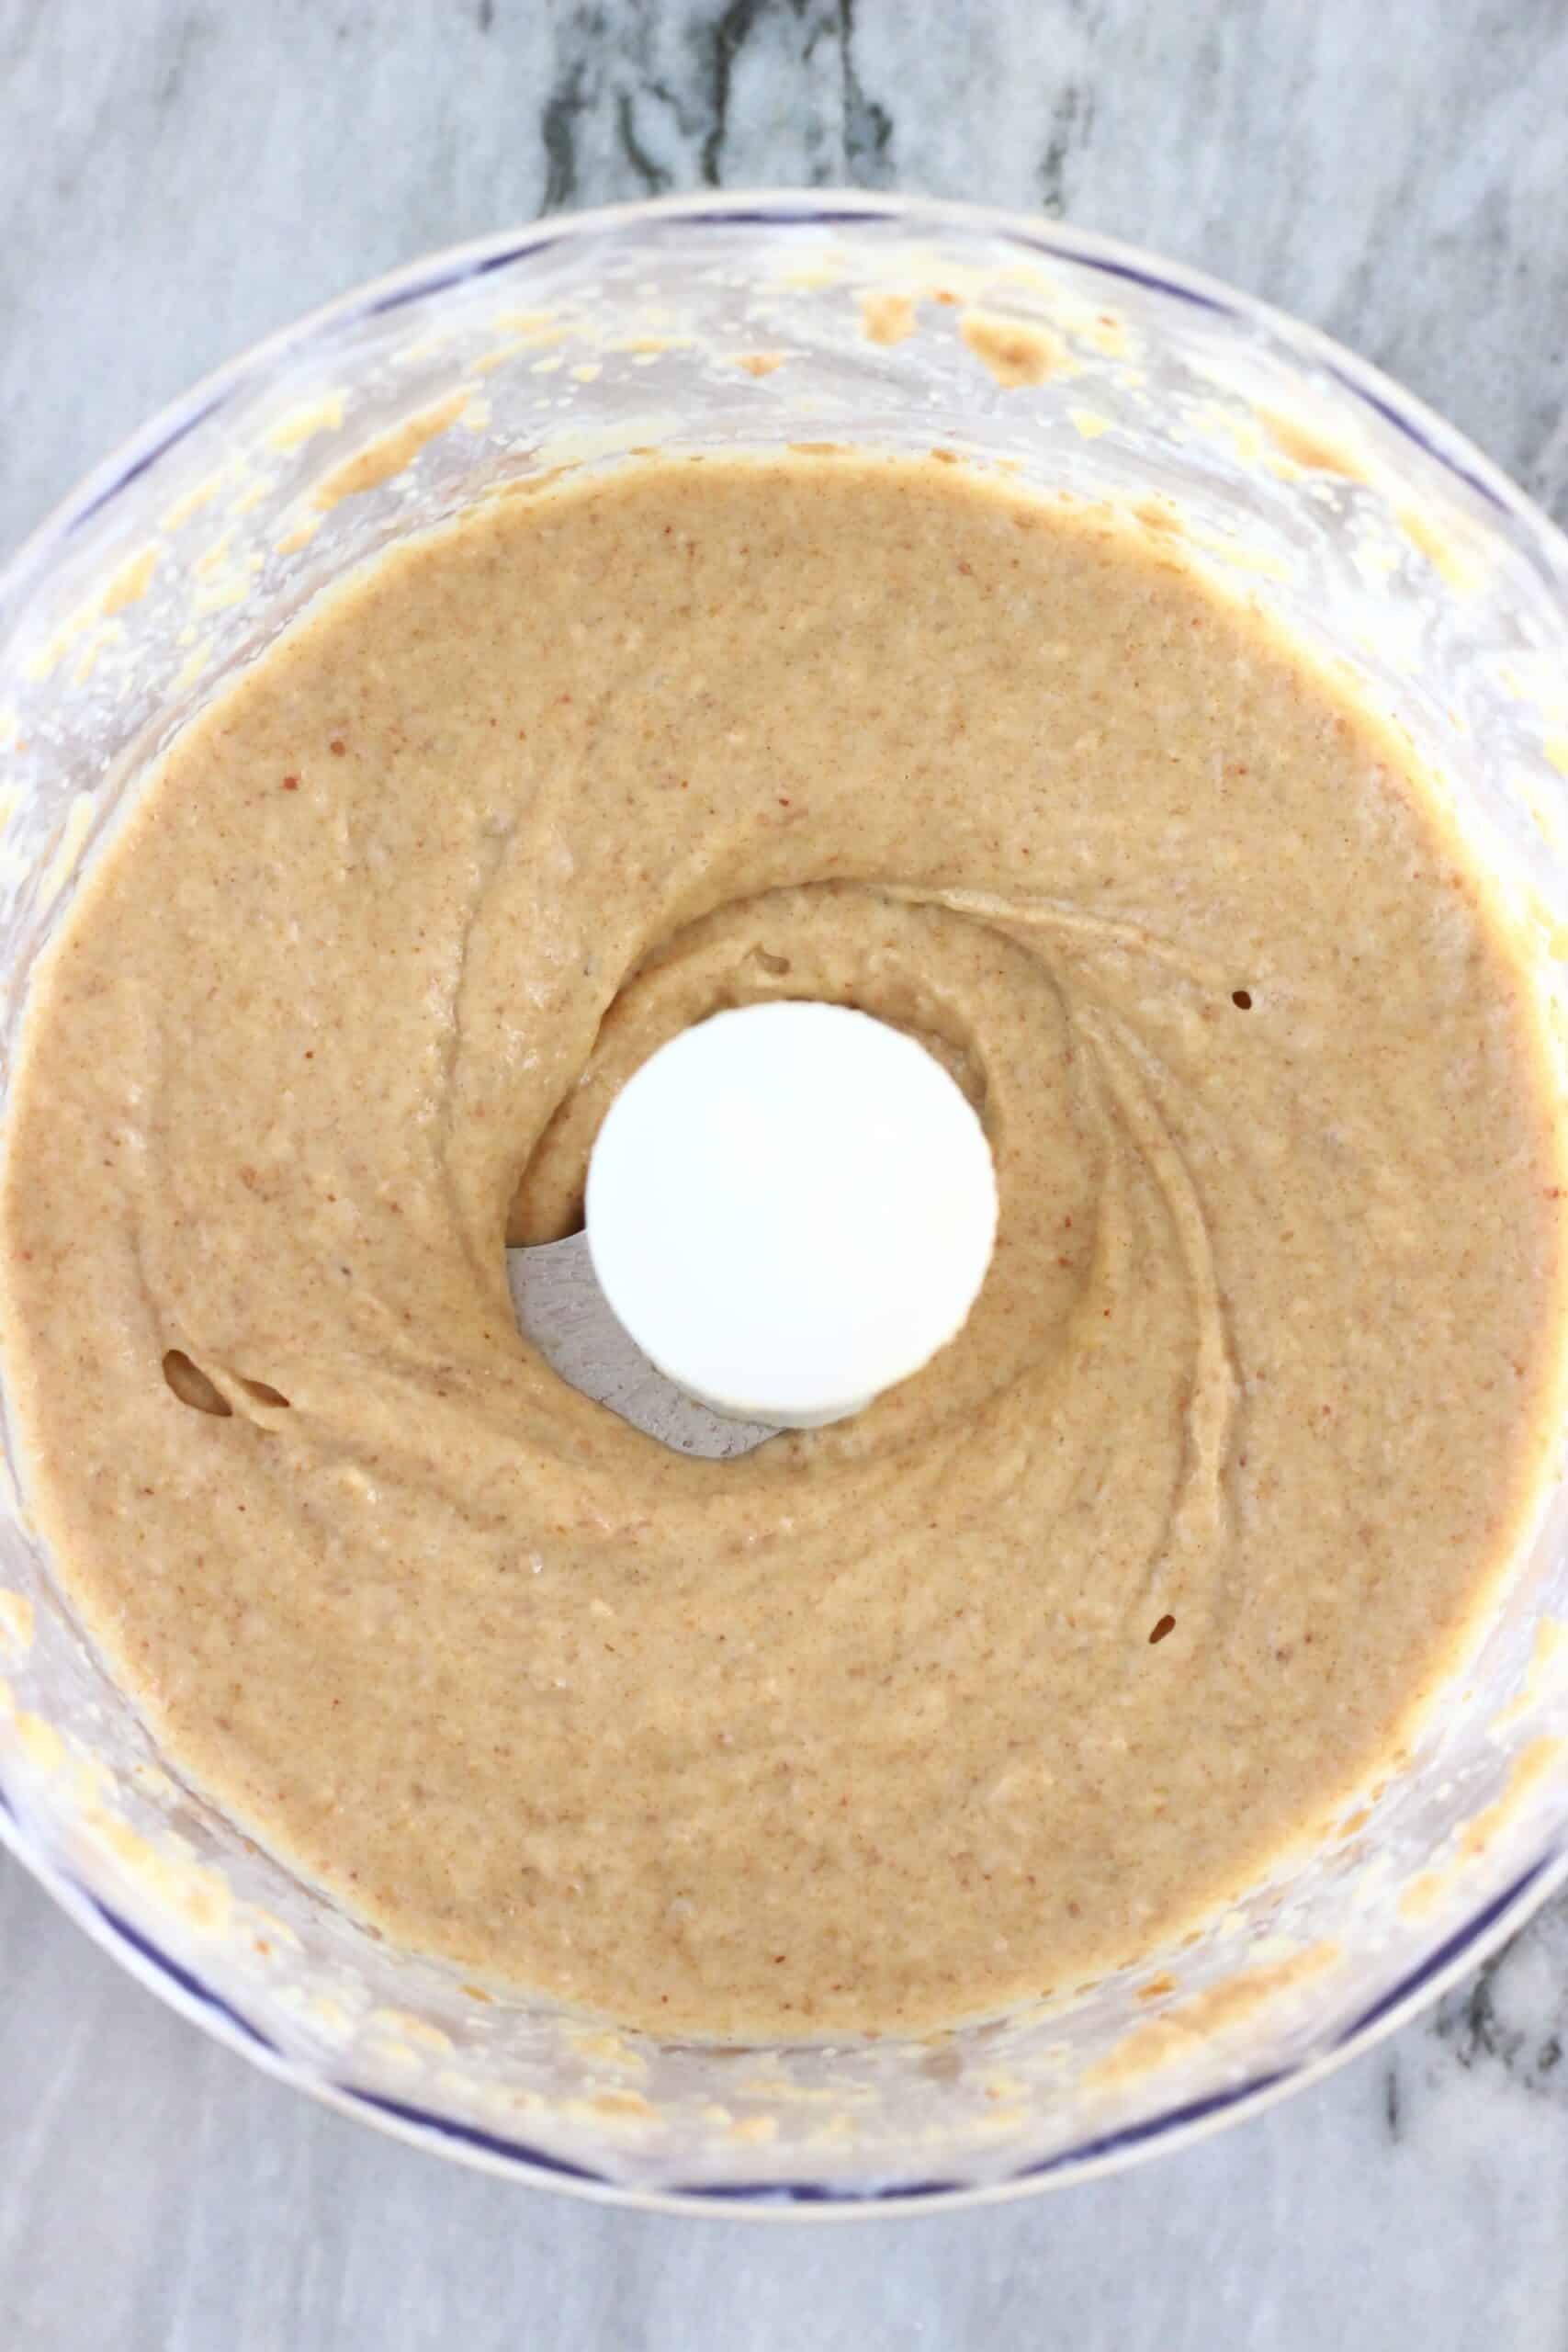 Blended up dates, almond butter and almond milk in a food processor